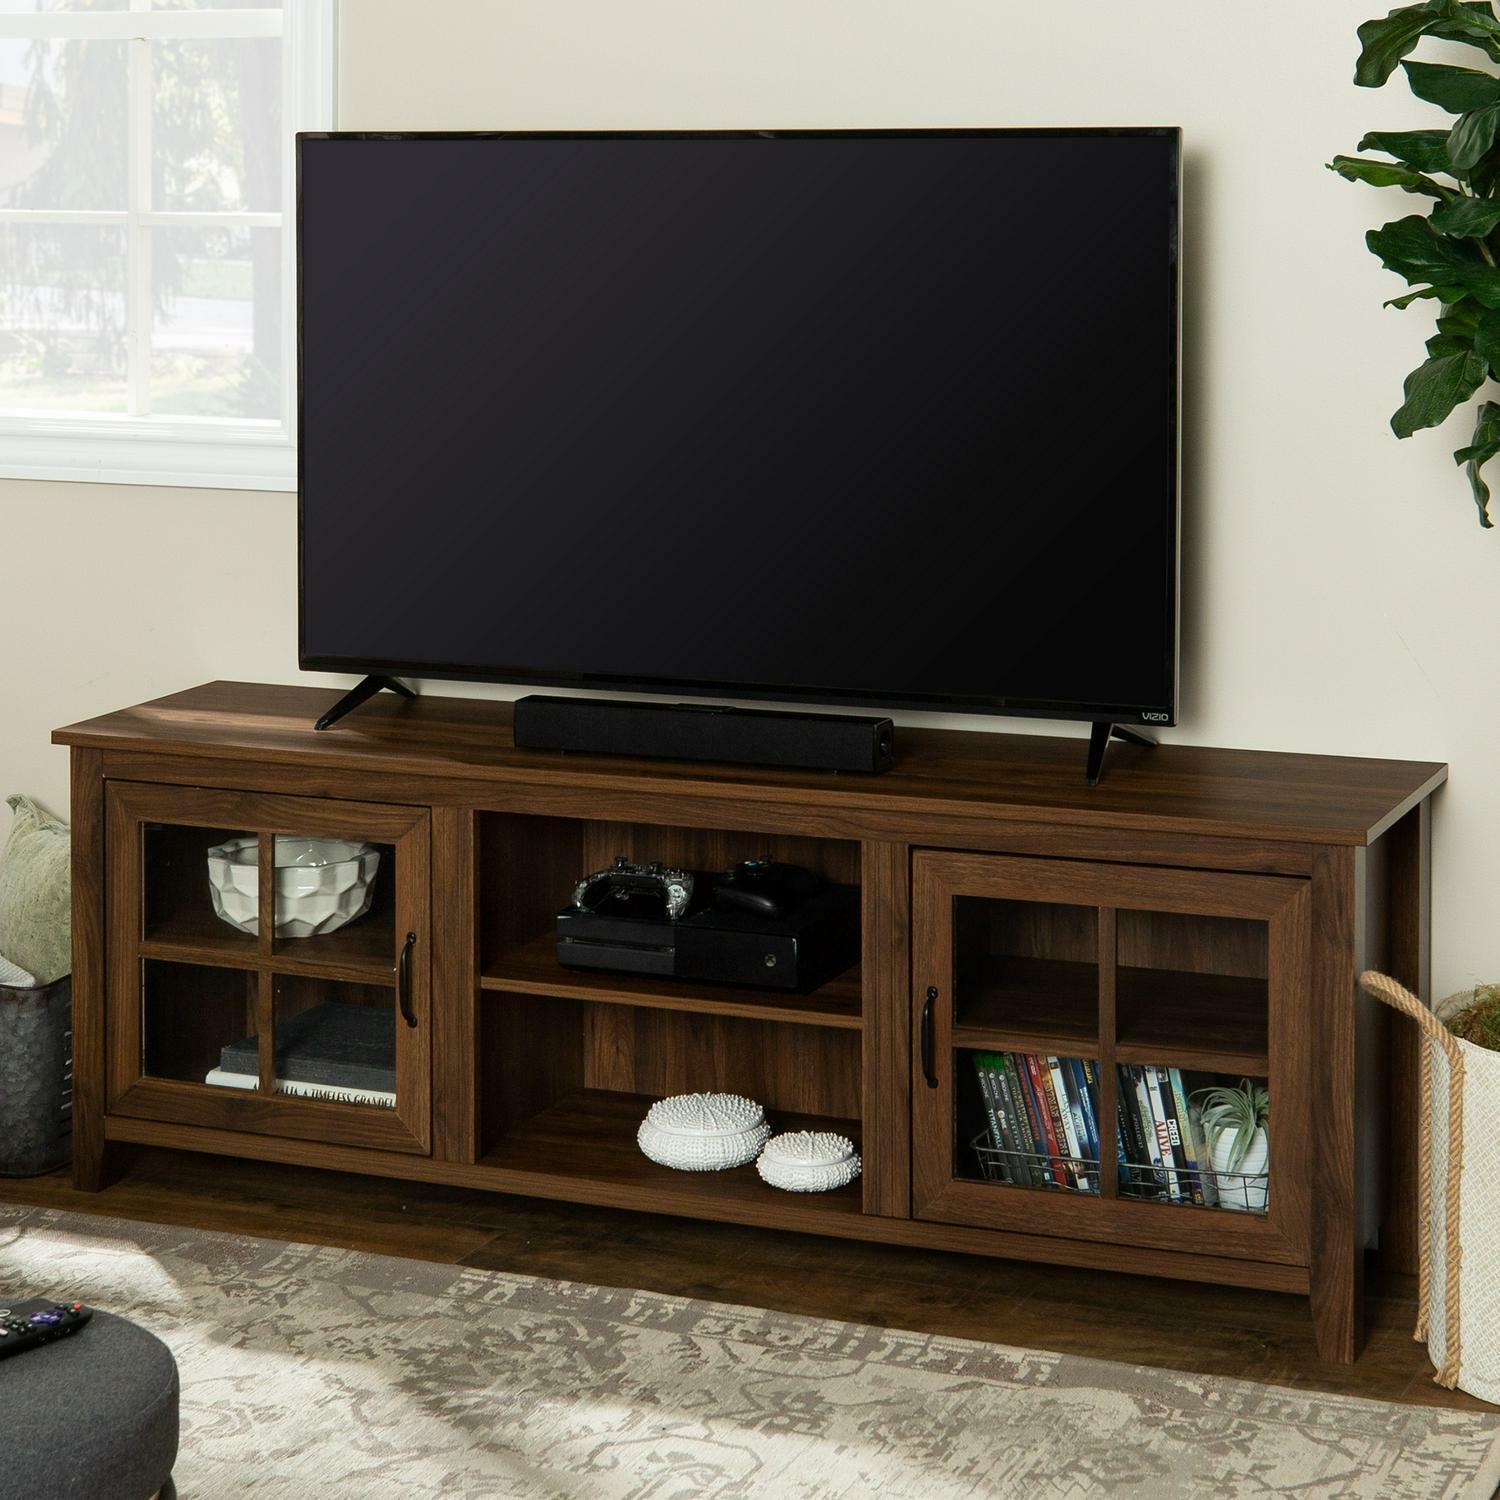 Primary image for 80-Inch TV Stand Entertainment Center Media Buffet Cabinet Shelves Dark Walnut